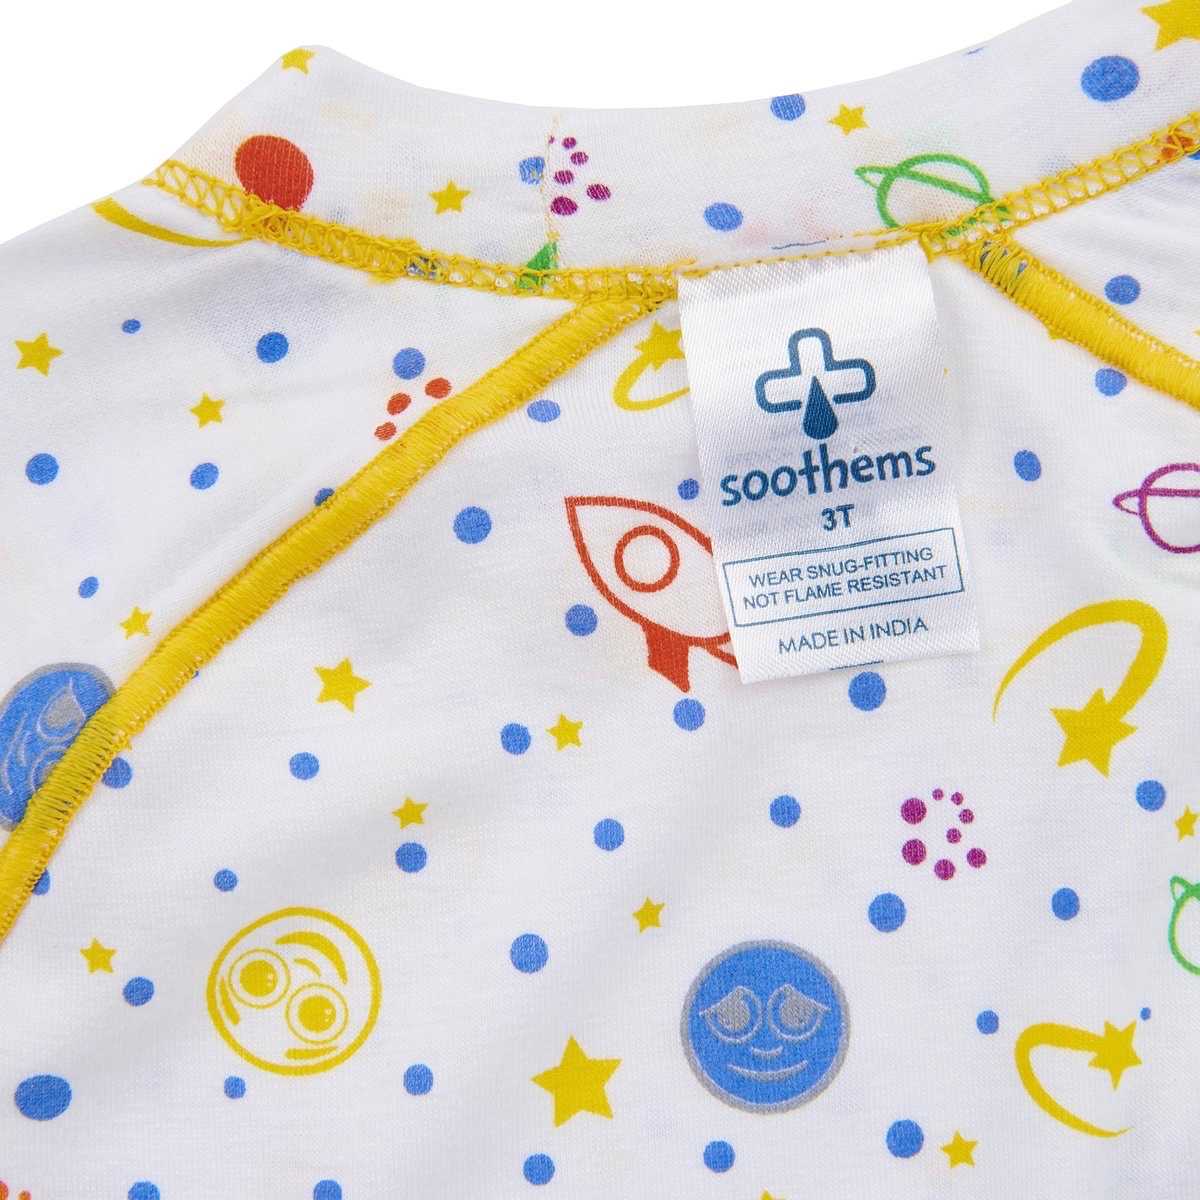 "Sensory Disorder and Eczema Clothing Toddler and kids sizes 2T -10"